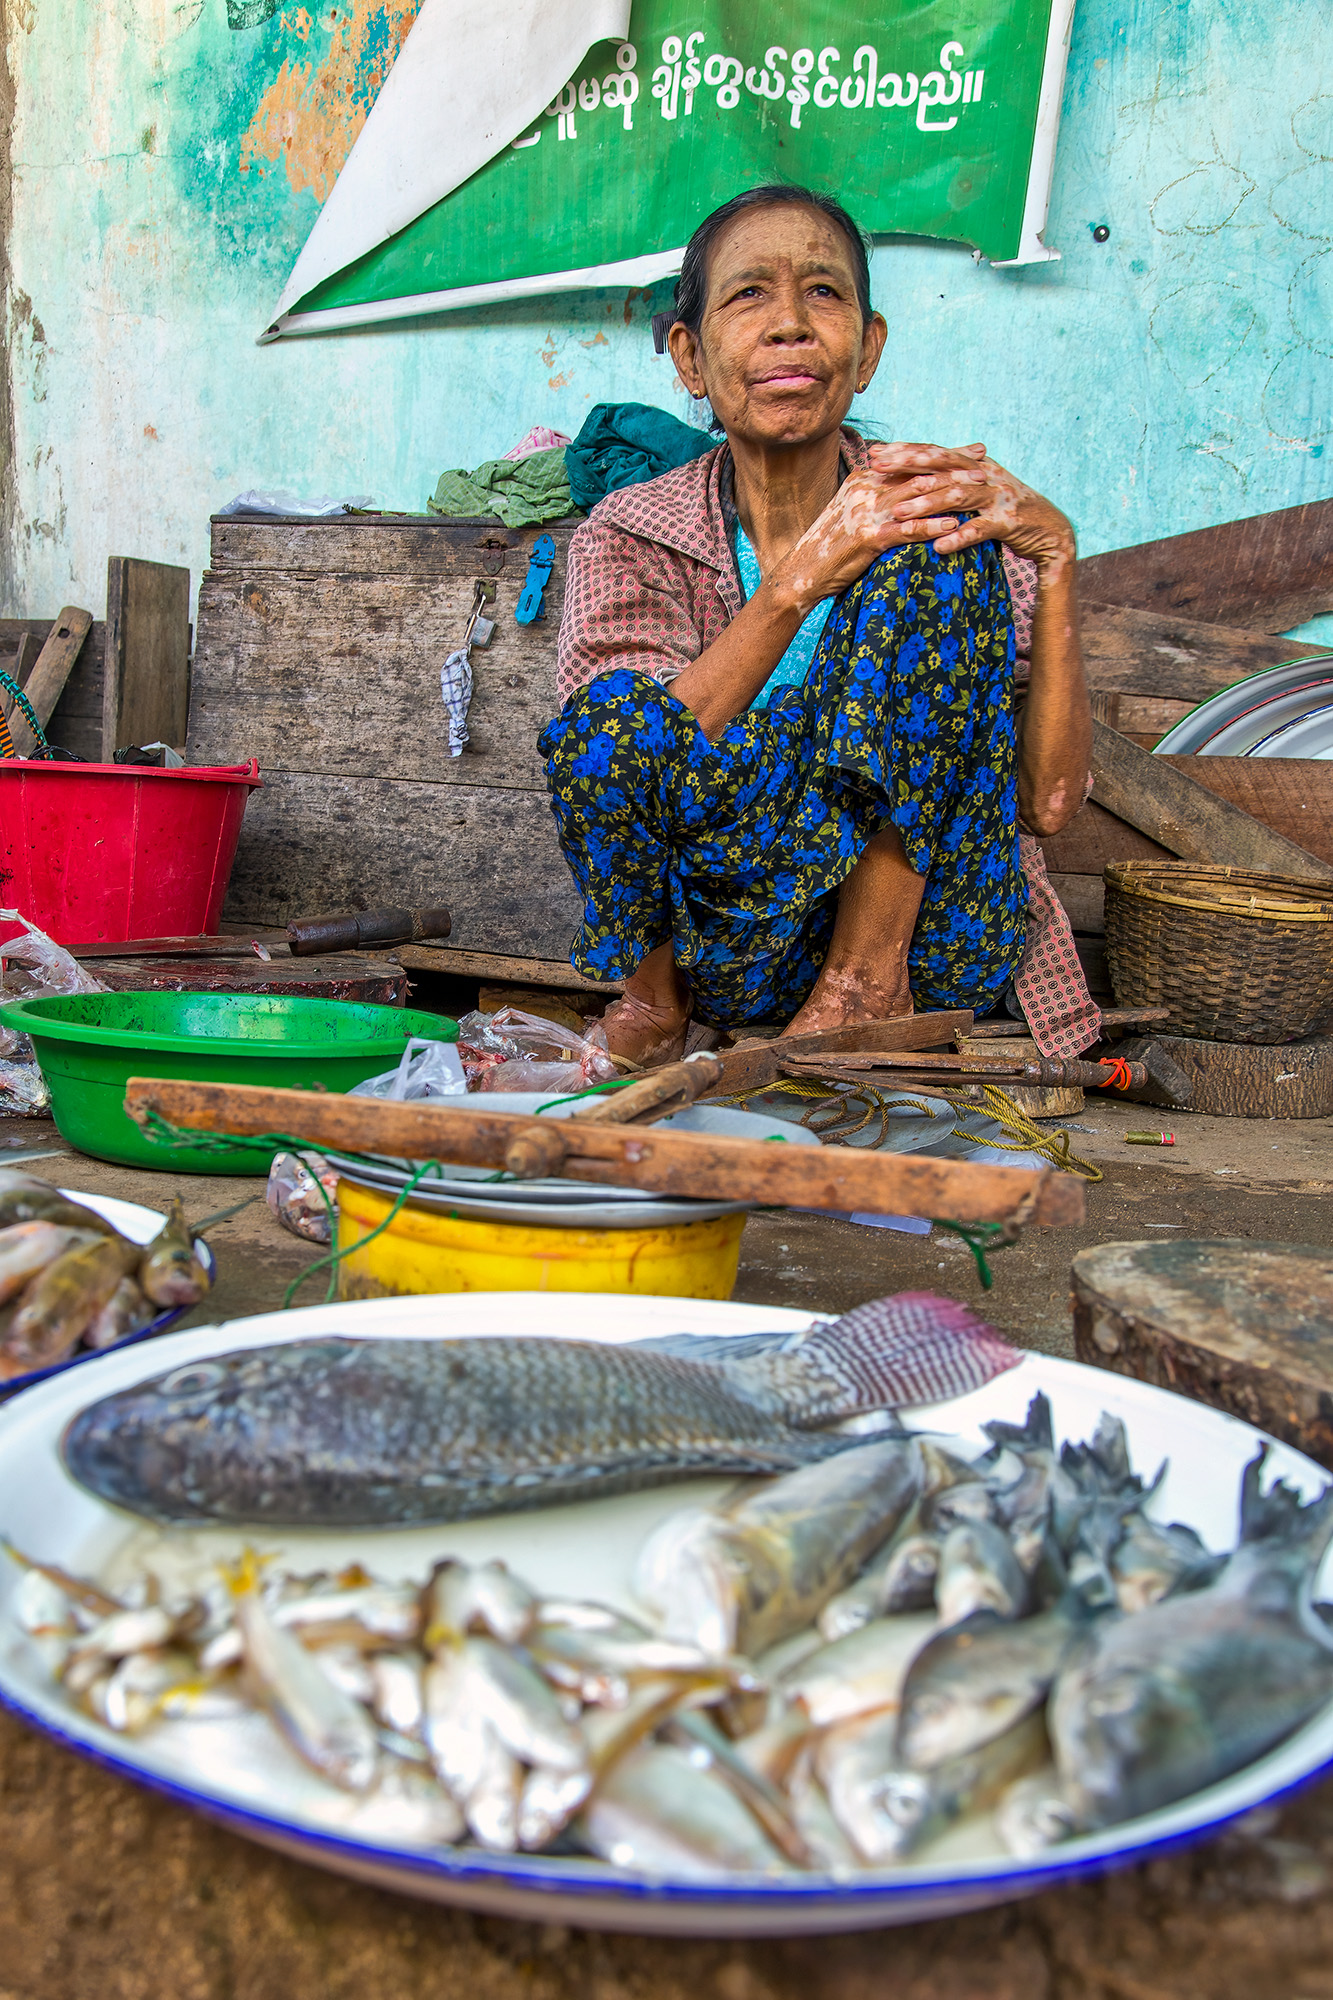 In the bustling market of Tettaung, Shan State, Myanmar, I captured a fleeting moment of everyday life. A seated woman tends...